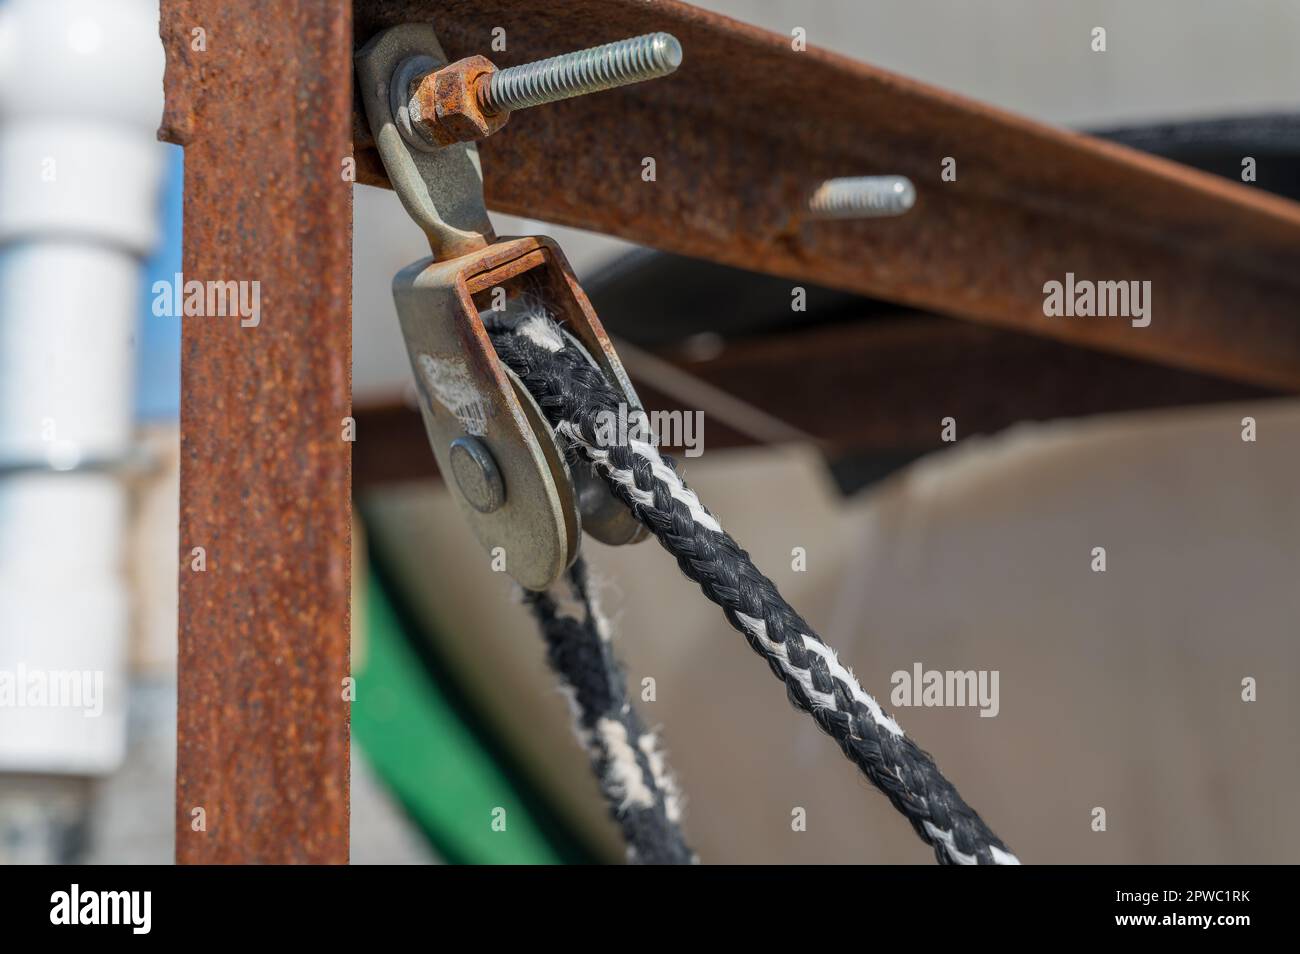 Small block and tackle under tension being used to control the movement of an object Stock Photo